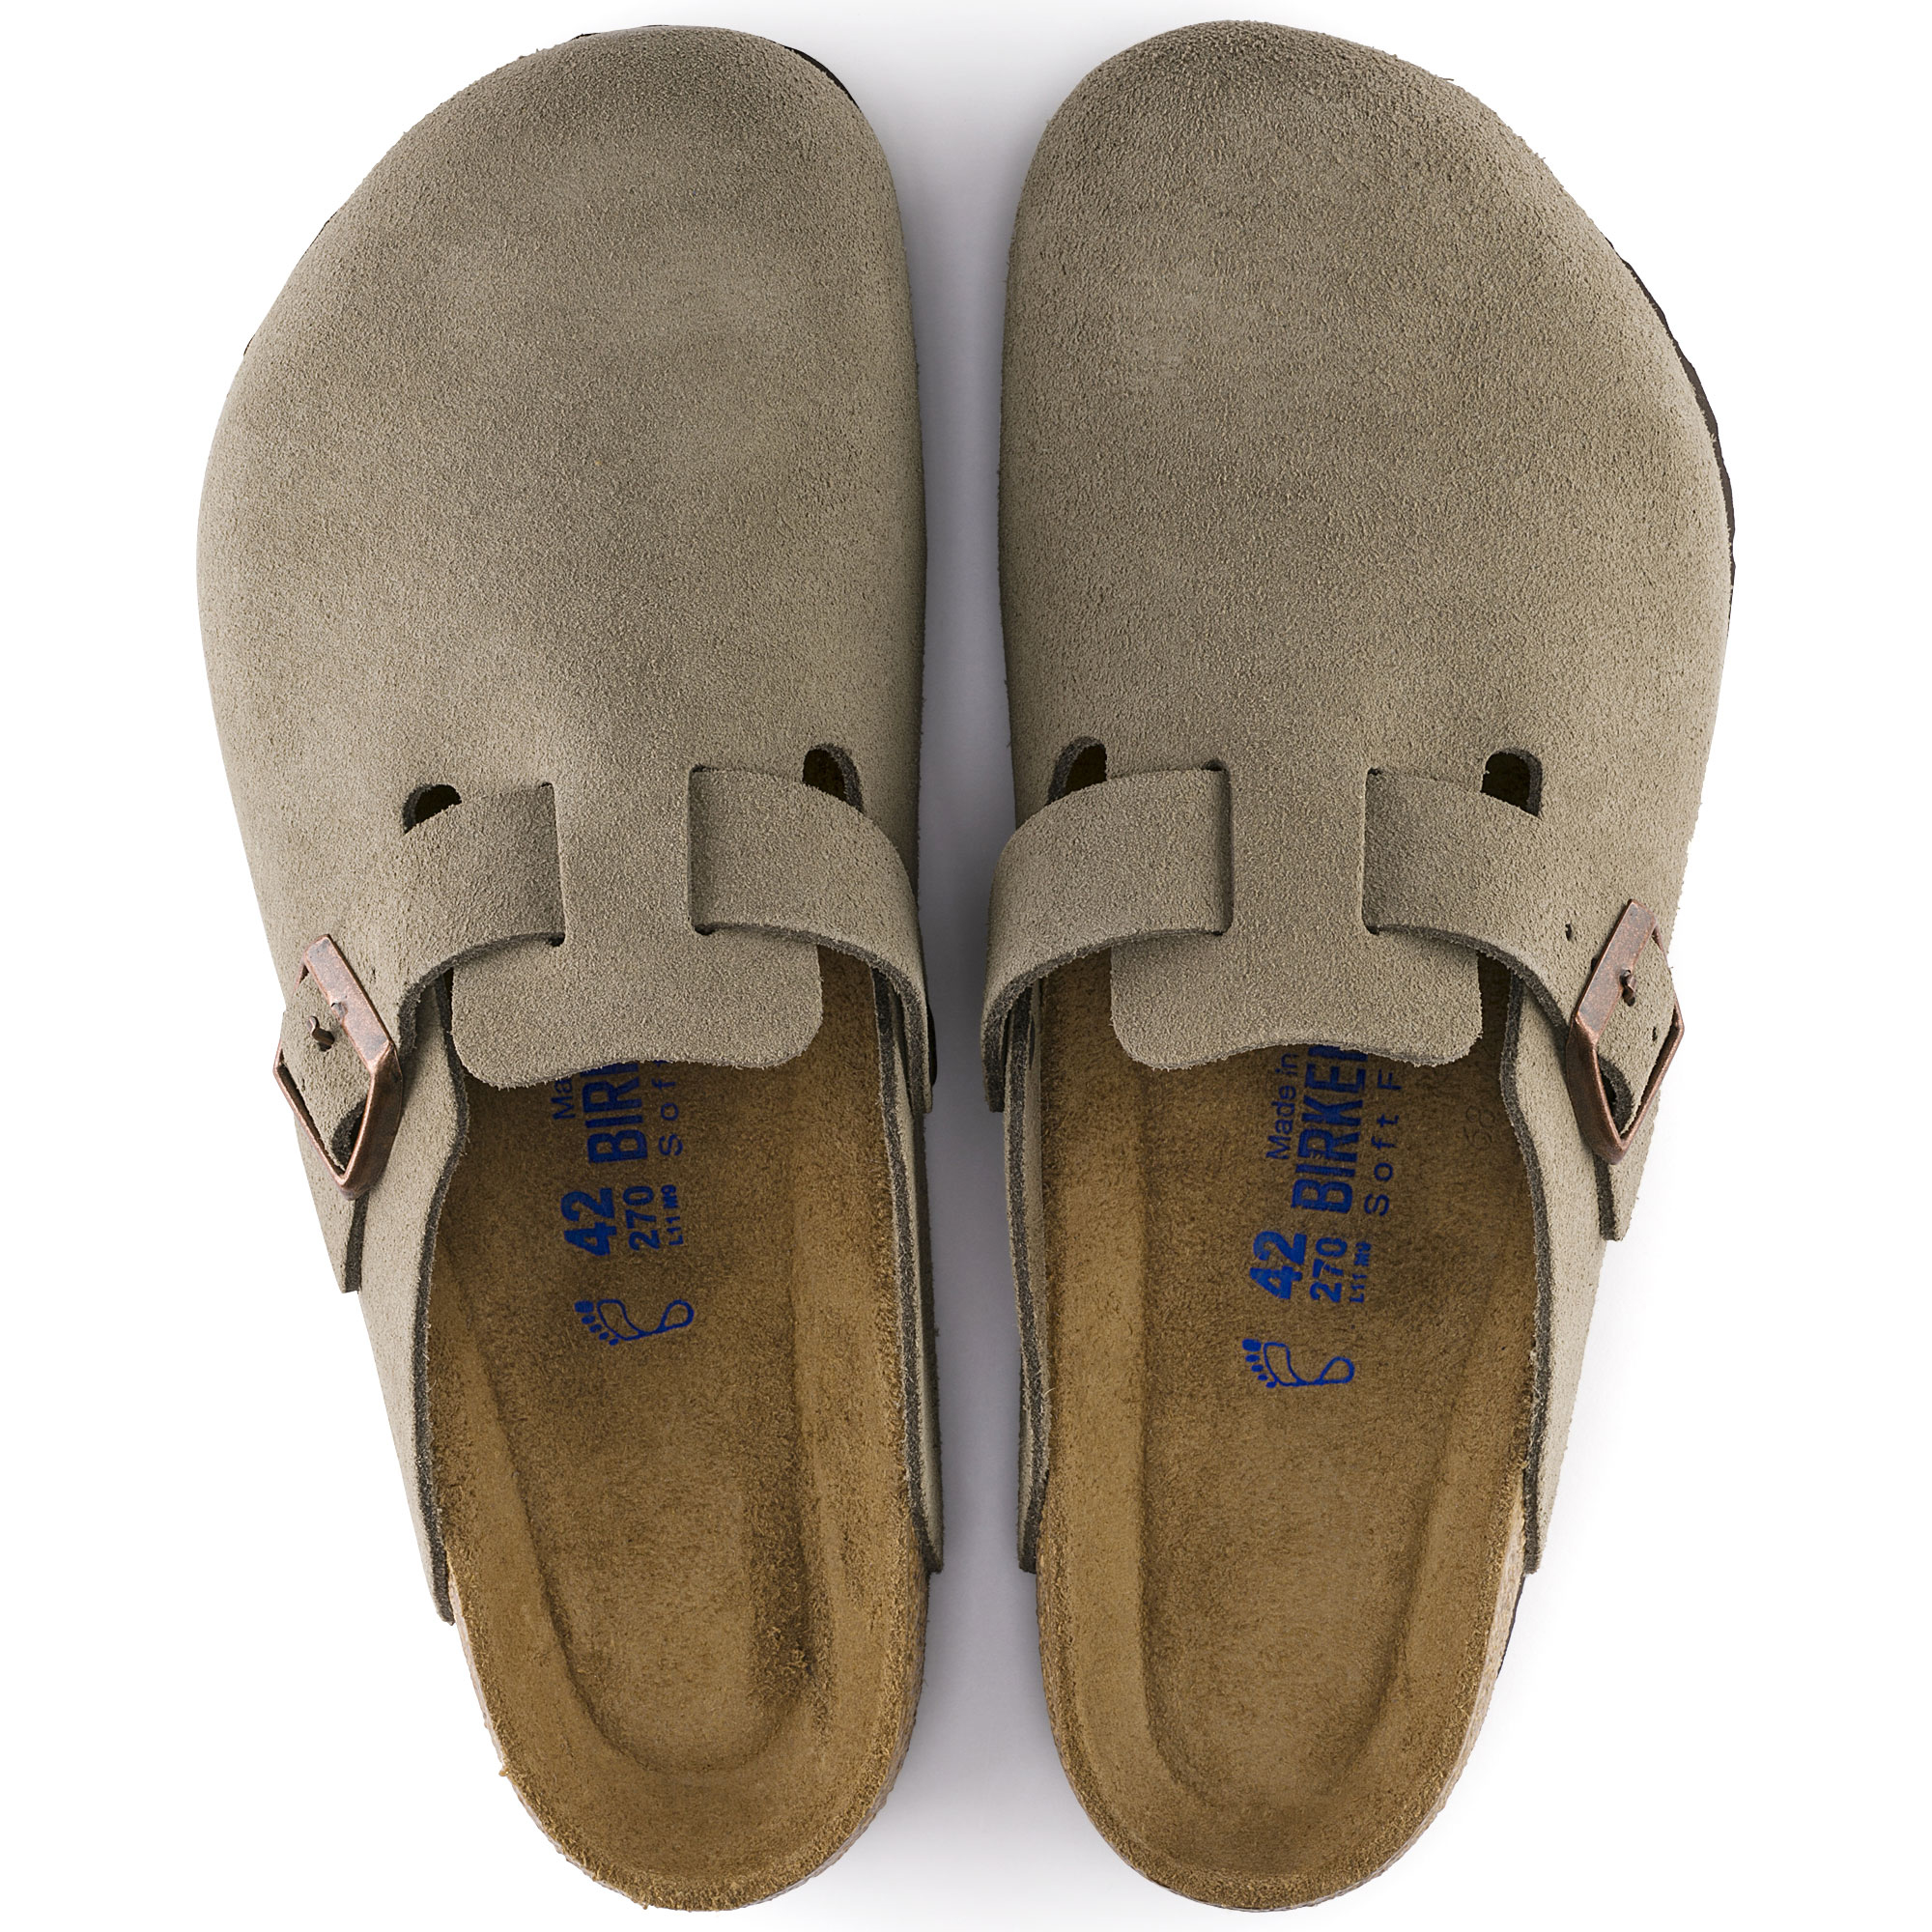 Boston Suede Leather Taupe | shop 